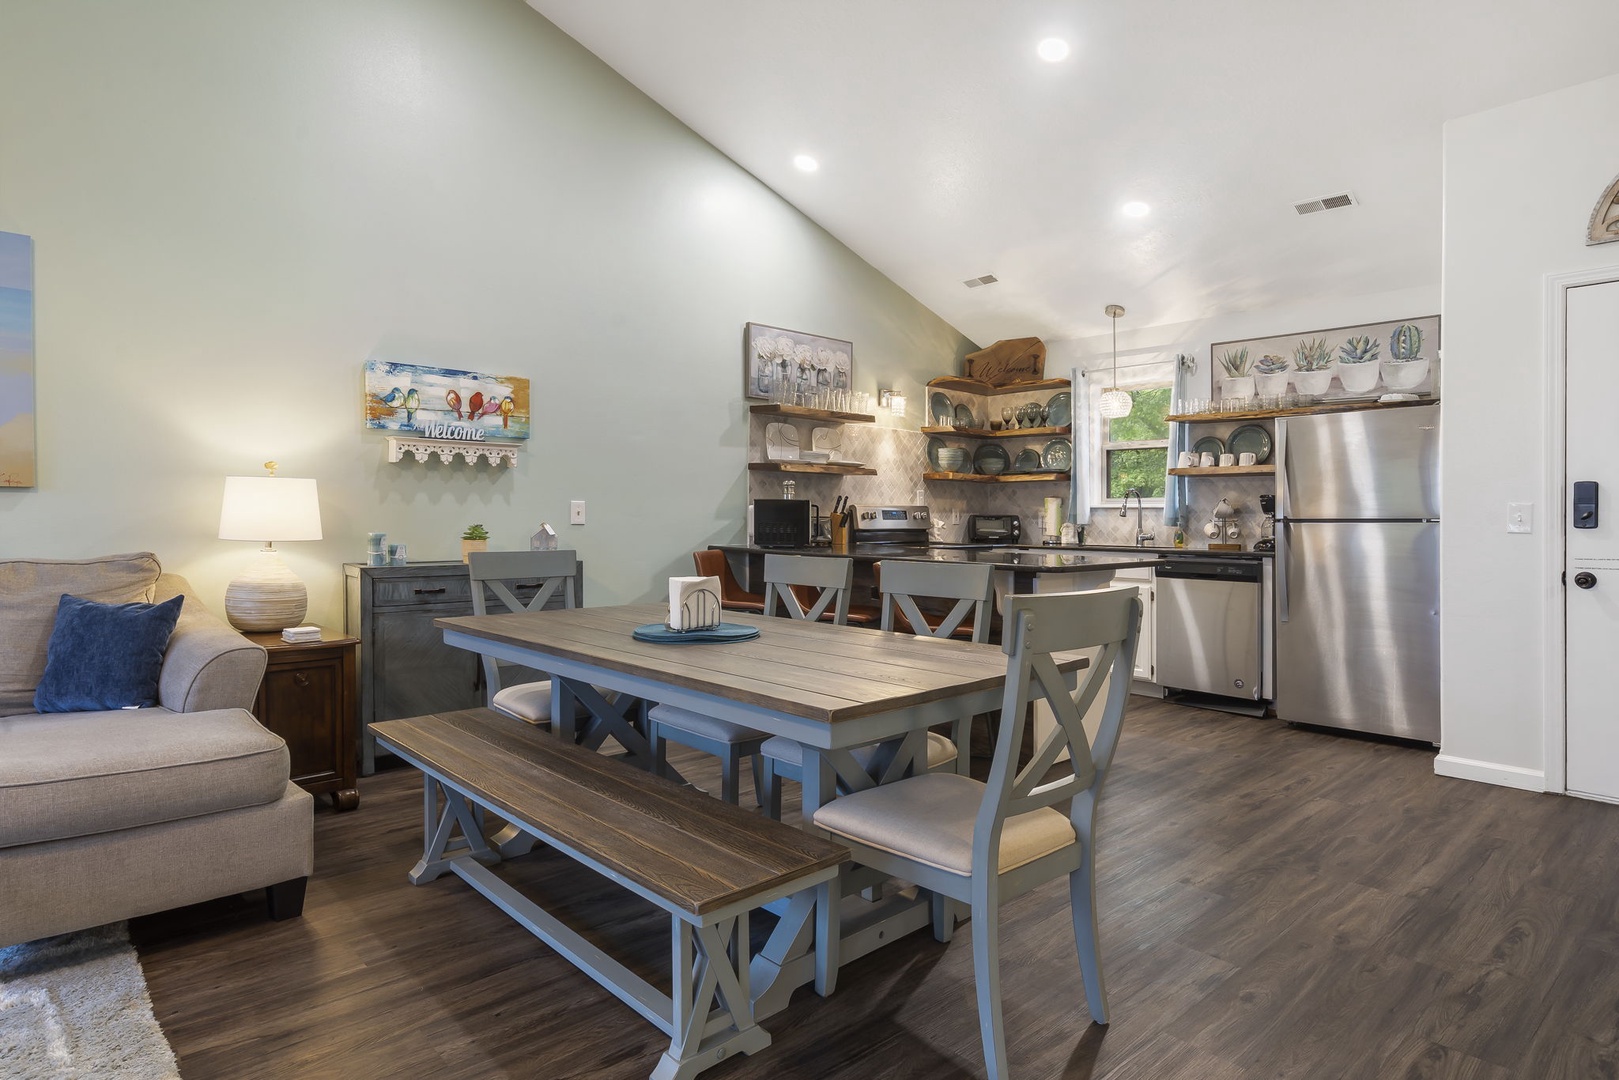 The whole family will love spending time together in the open Living/Dining and Kitchen areas